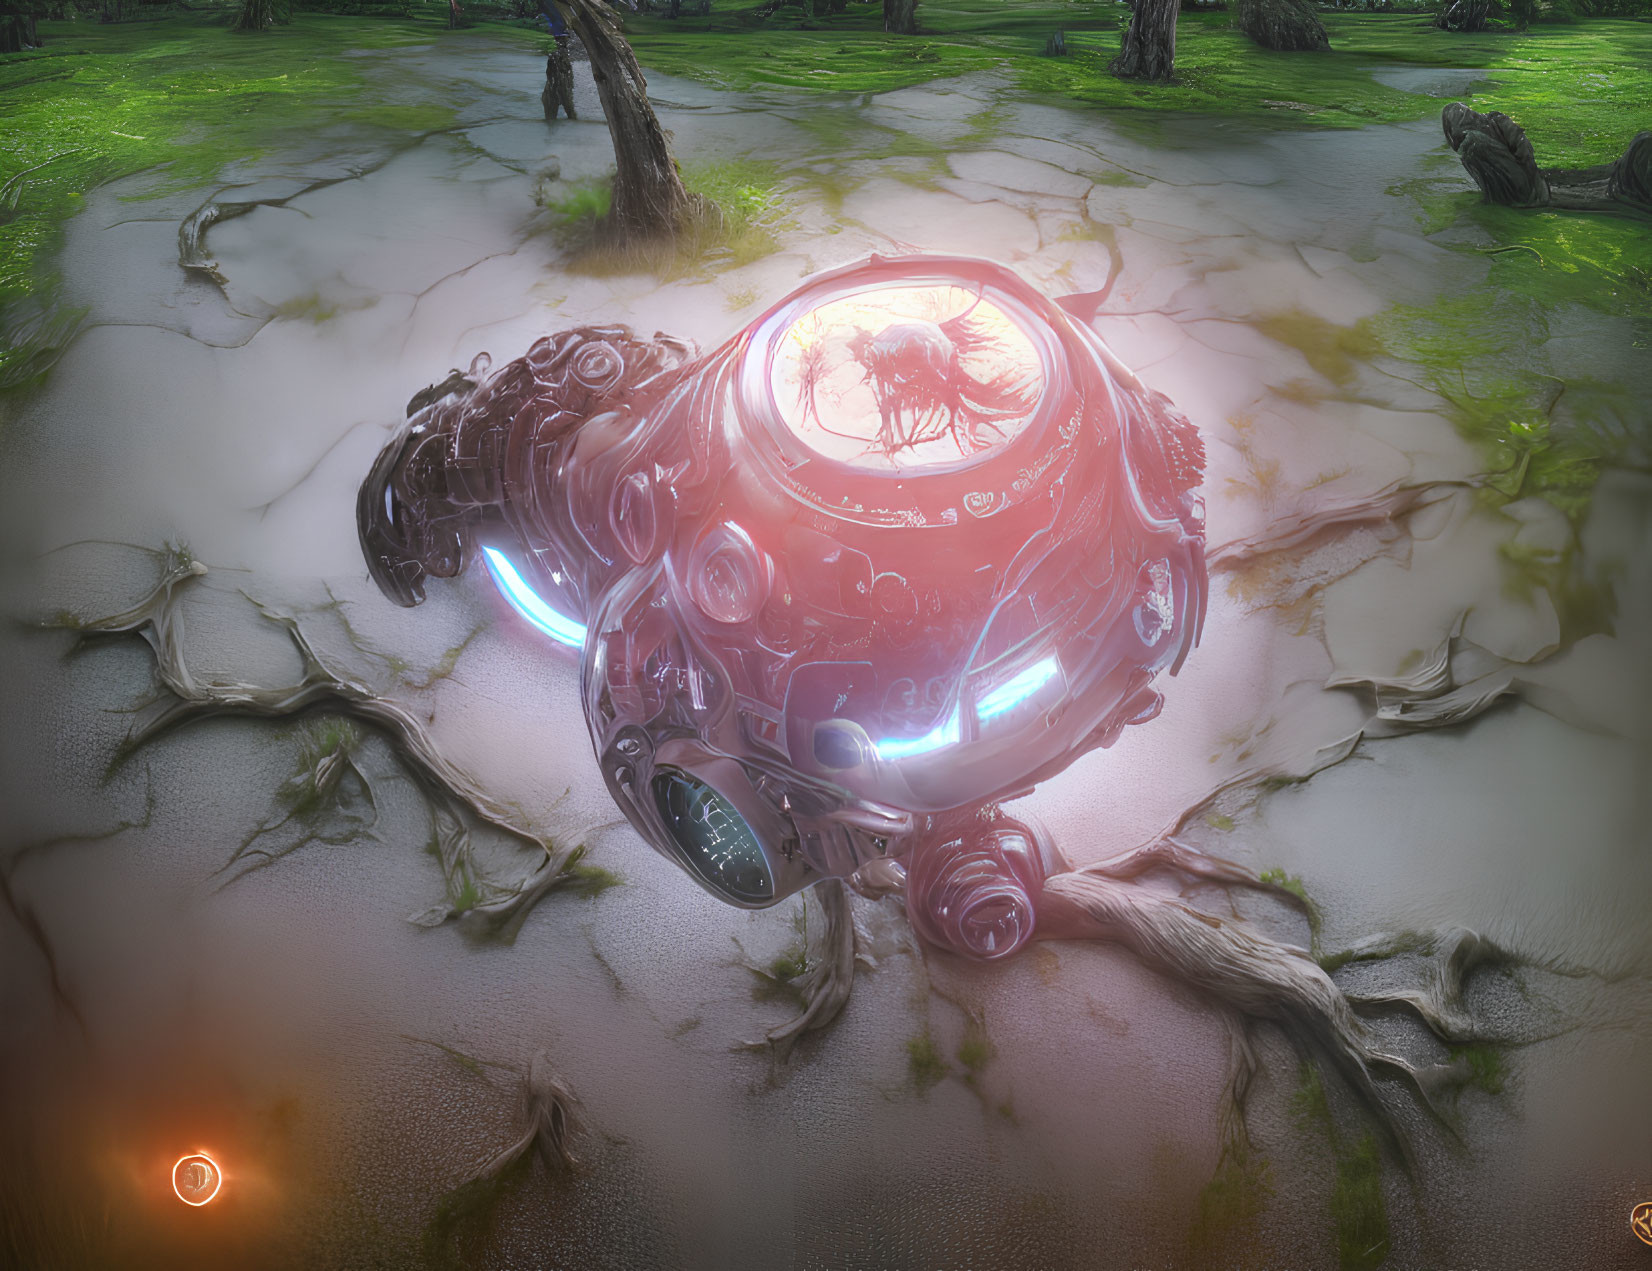 Futuristic spherical robot hovering over cracked ground in sci-fi landscape